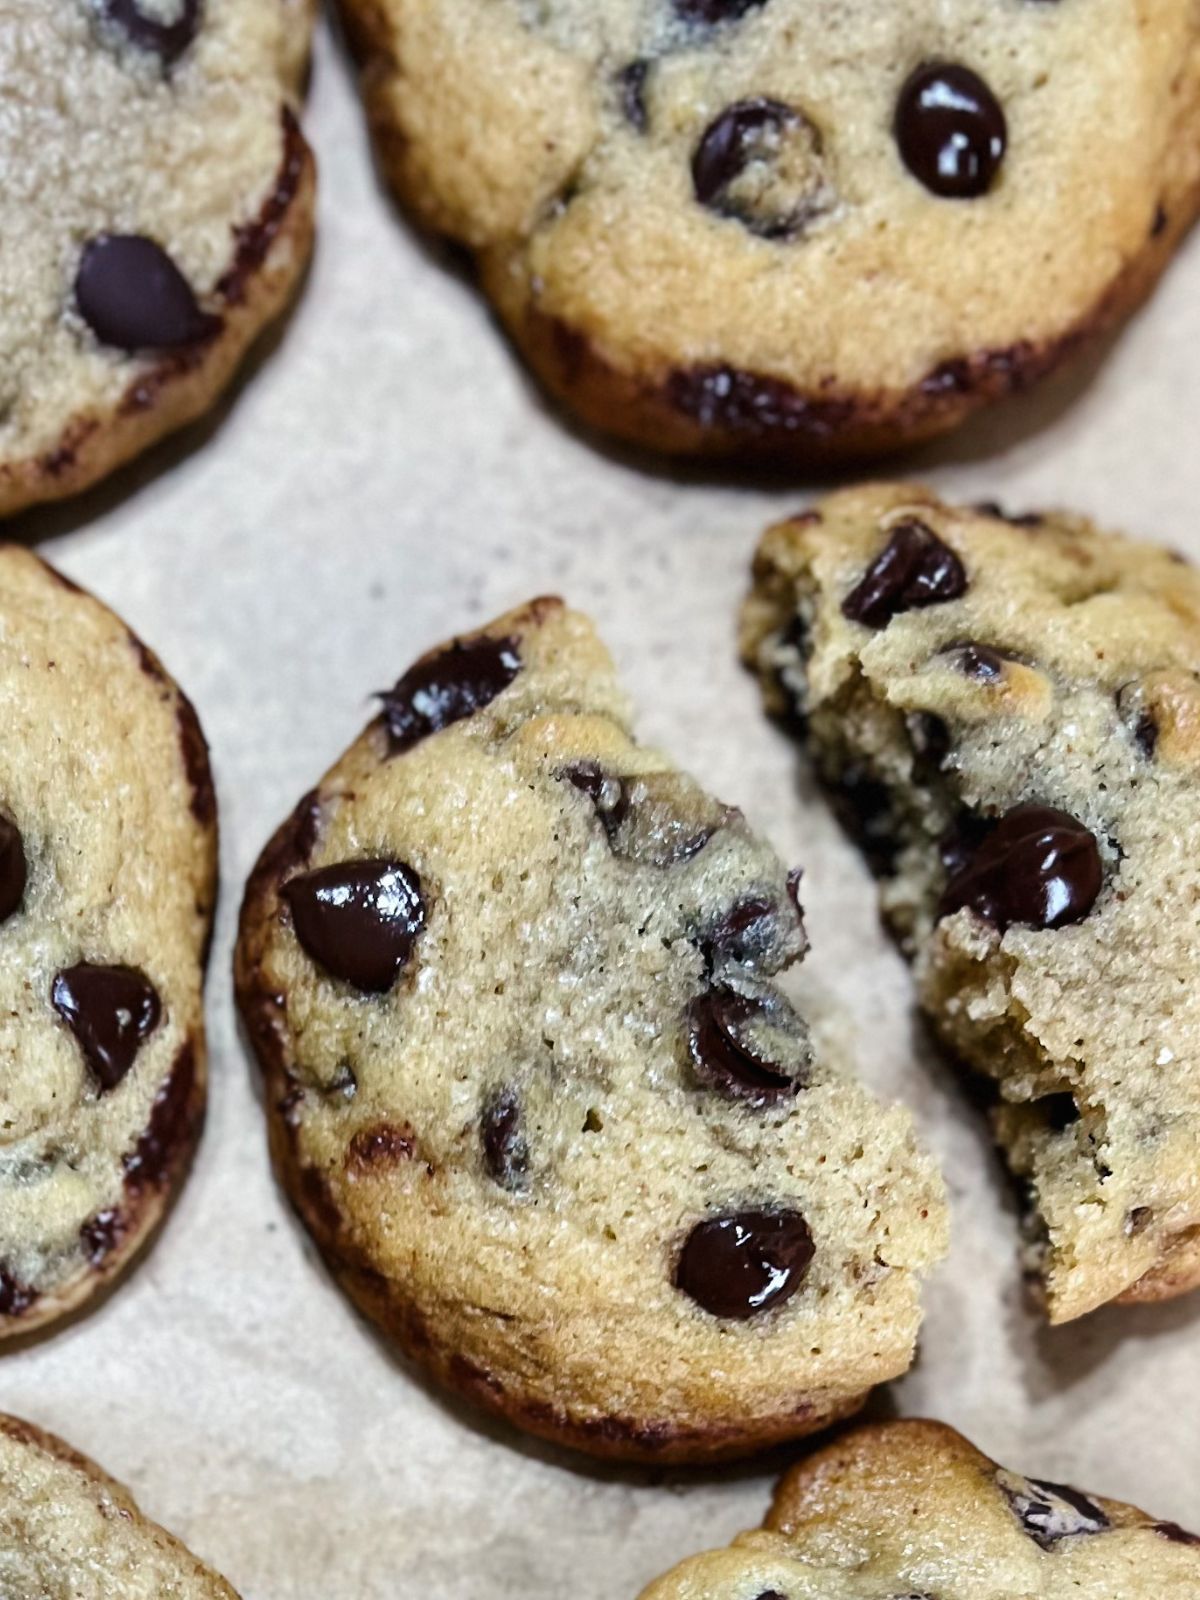 Freshly baked sourdough chocolate chip cookies on parchment paper.